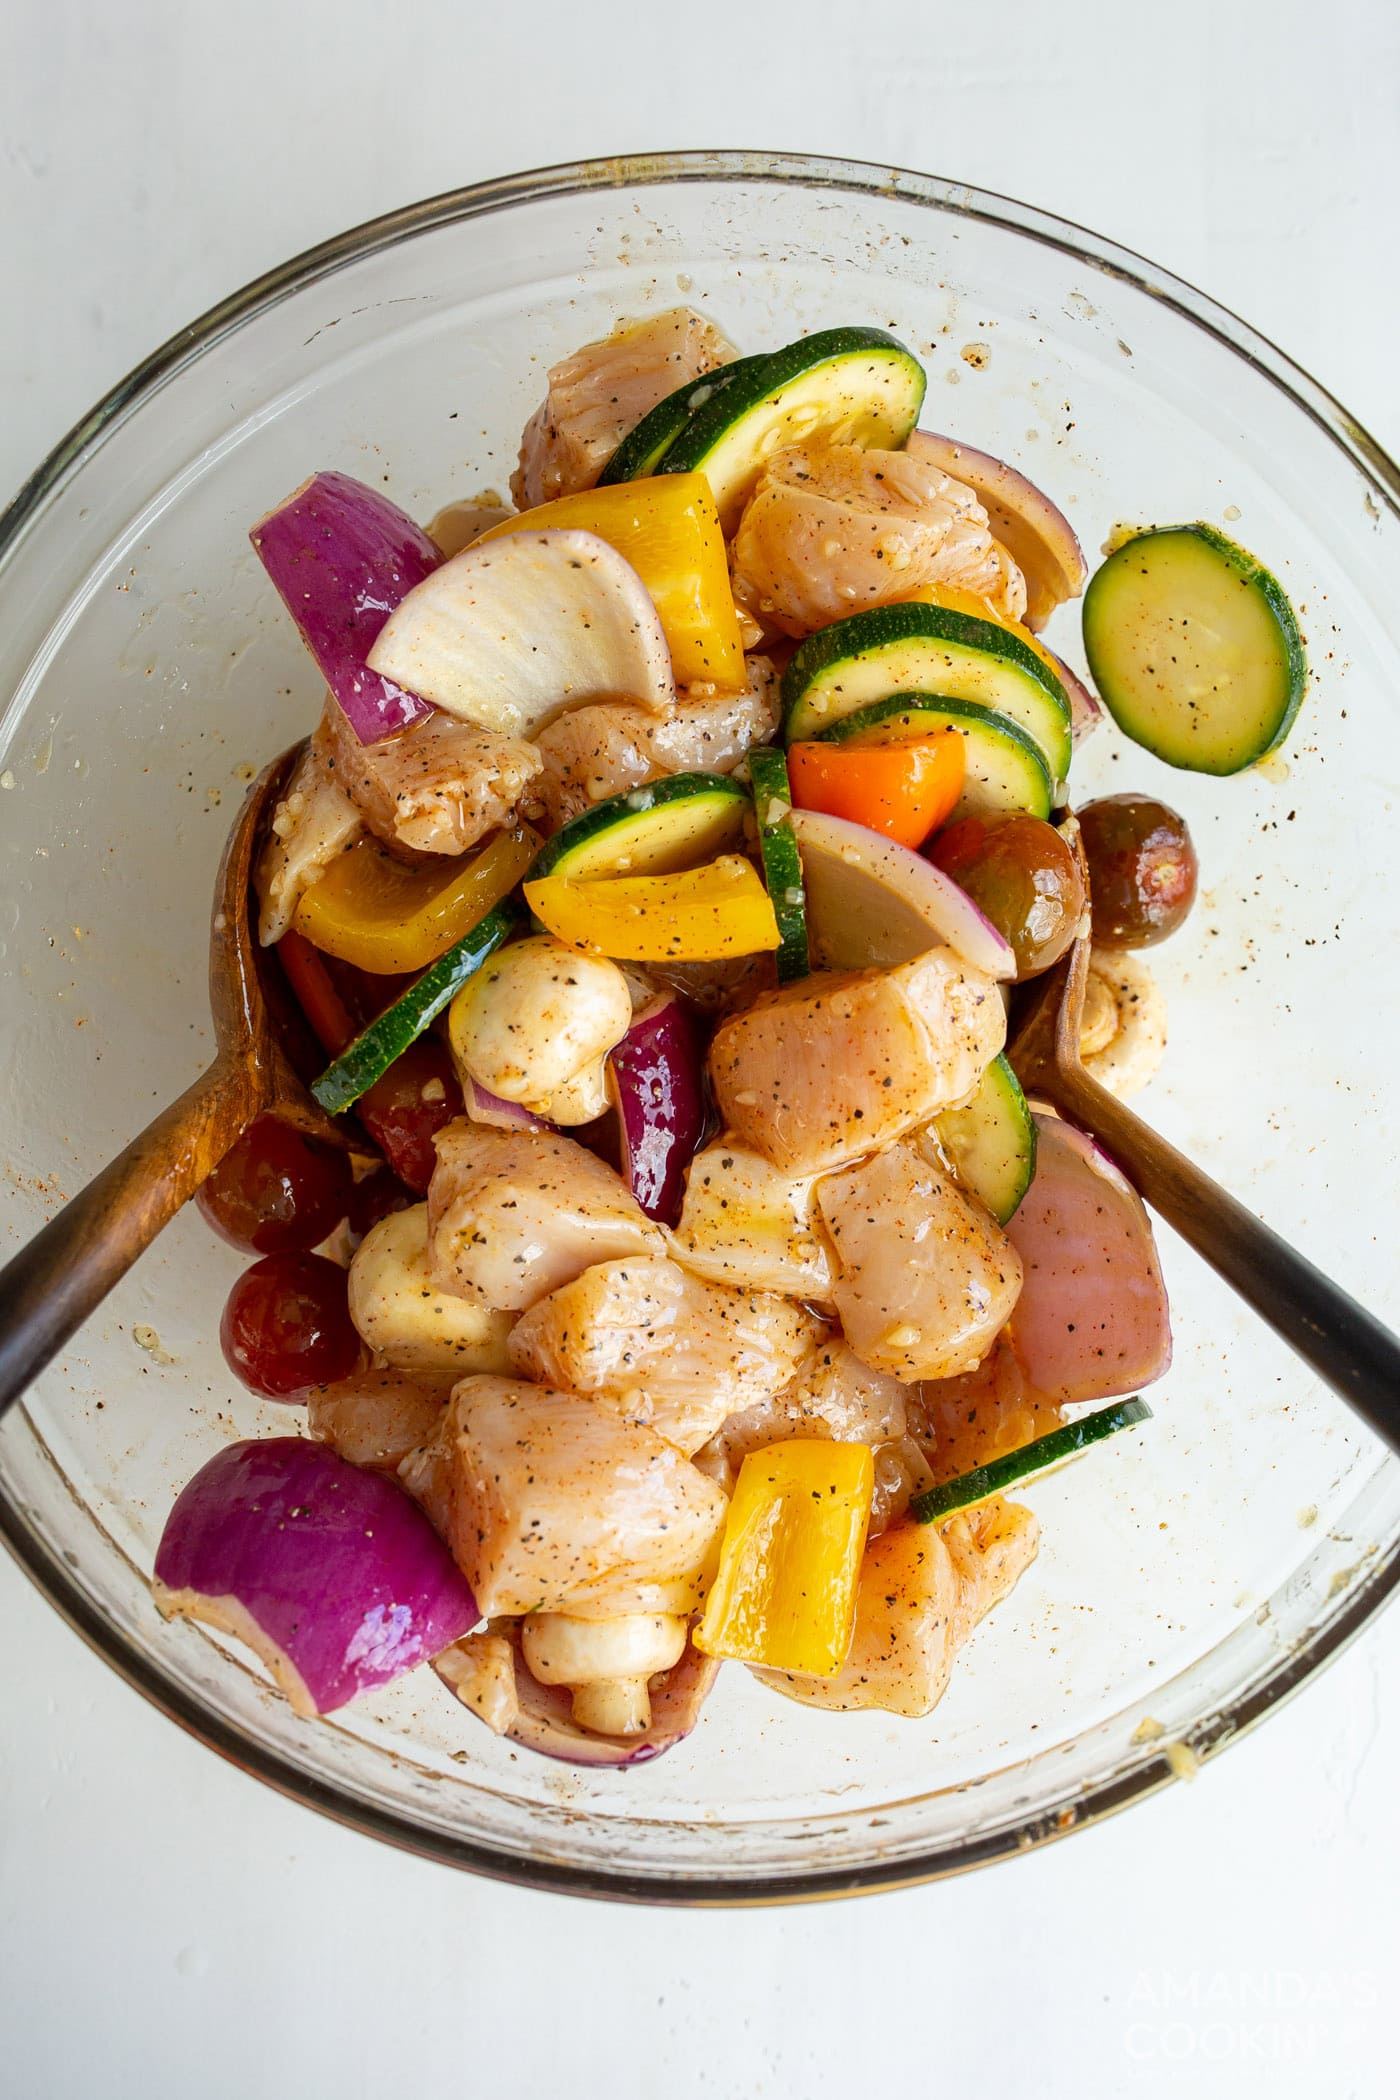 chicken and veggies in a bowl with marinade